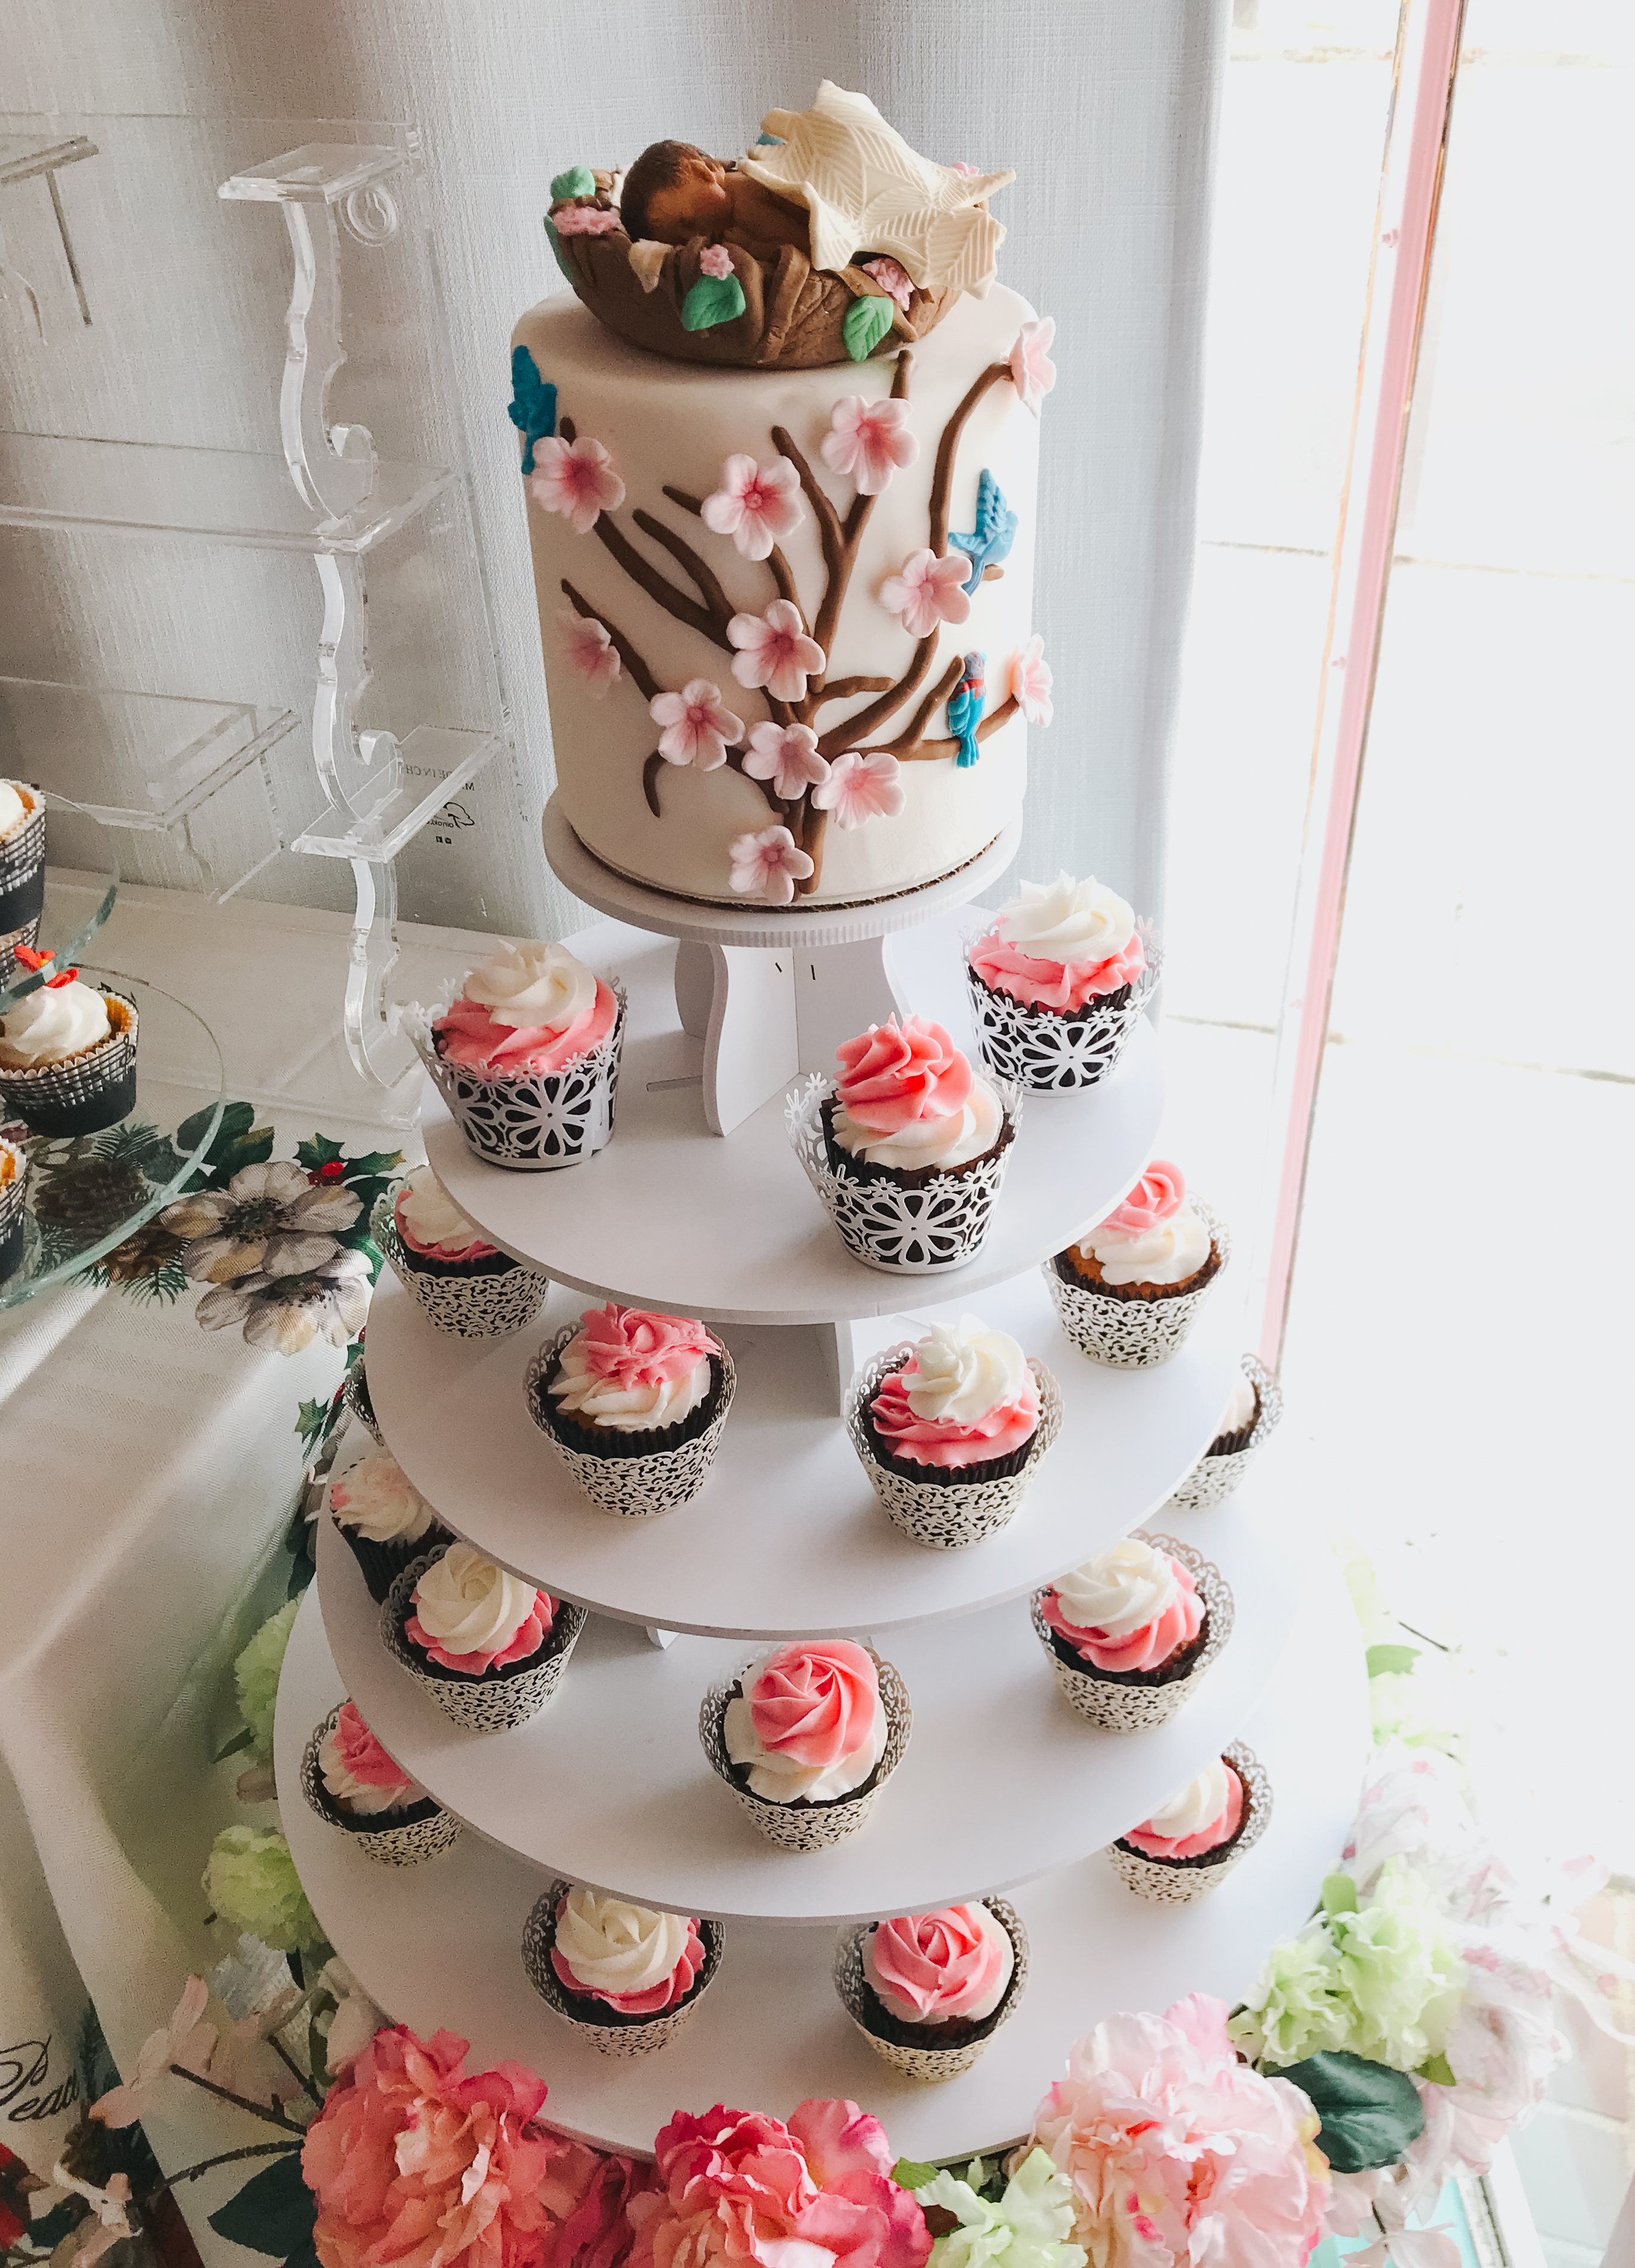 Cupcake Towers with a Cake Centerpiece